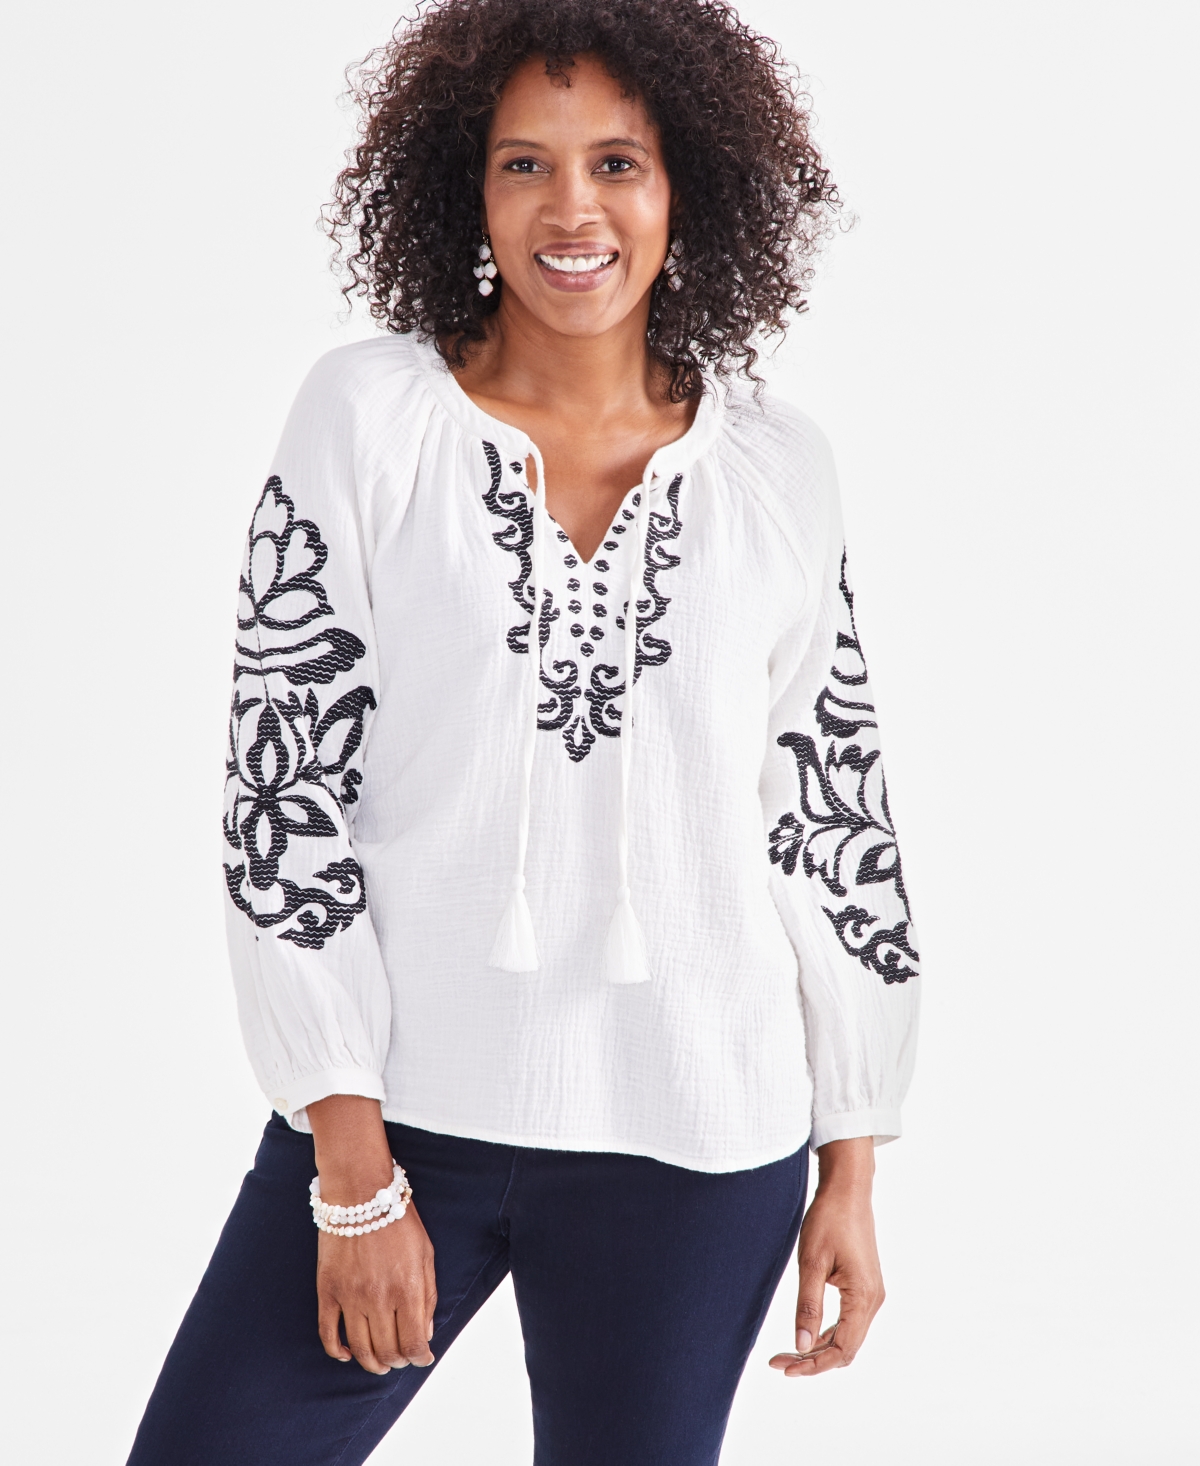 Women's Split-Neck Long-Sleeve Embroidery Peasant Blouse, Created for Macy's - White Black Embroidery